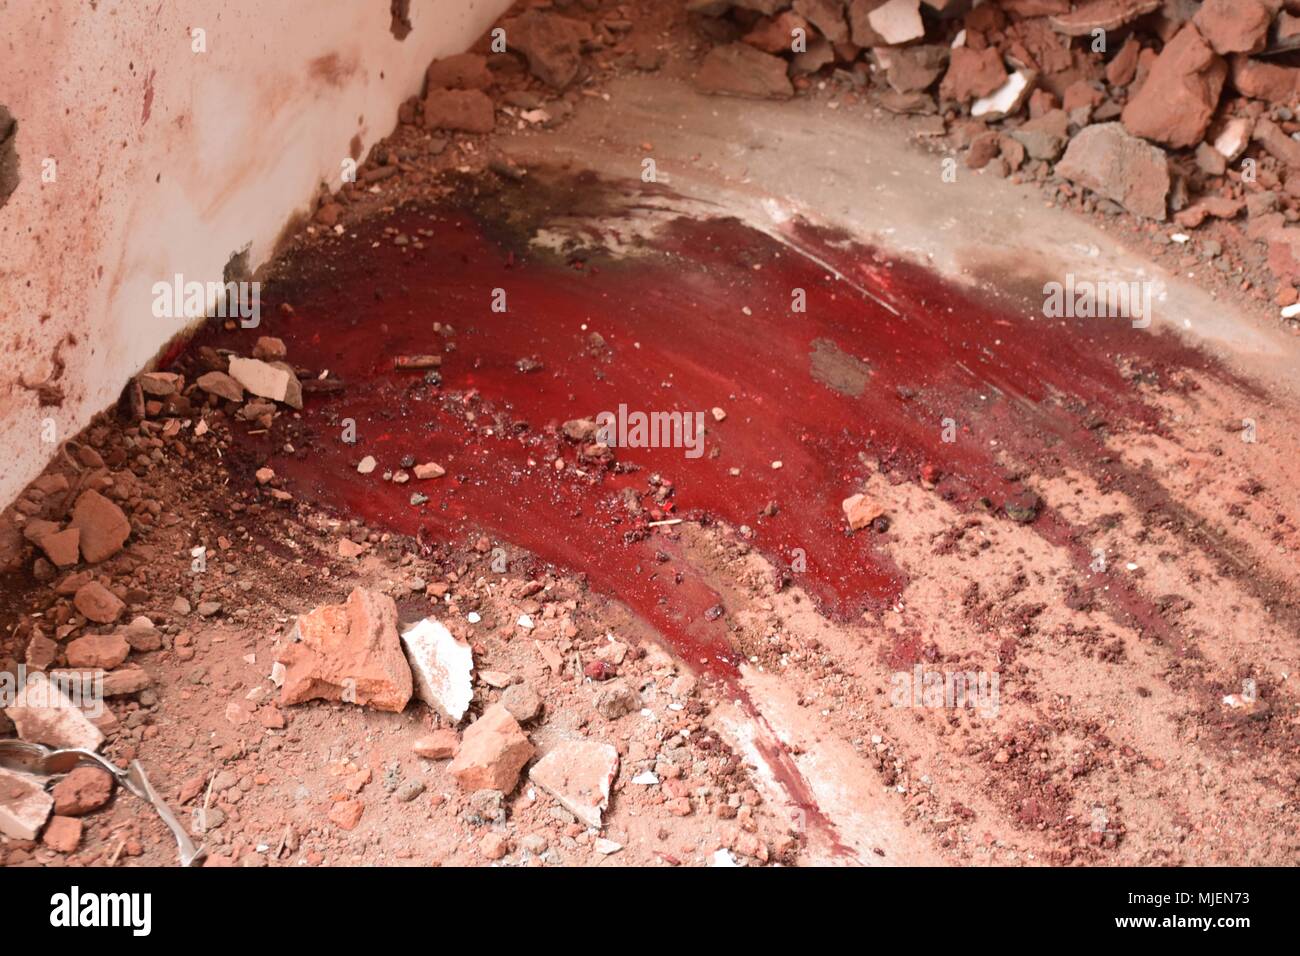 May 5, 2018 - Srinagar, Jammu & Kashmir, India - (EDITORS NOTE: Image contains graphic content) Blood scattered over the floor of Residencial house which was gutted during Encounter.4 Killed and several injured in an encounter between Indian forces and militants at chatabal area of Srinagar summer capital of Indian Kashmir on Saturday. Three militants were killed during a brief shootout after government forces laid seige around densely populated chatabal area of Srinagar. A young man also died after he was hit by the armoured vehicle during the clashes between the residents and police force a Stock Photo